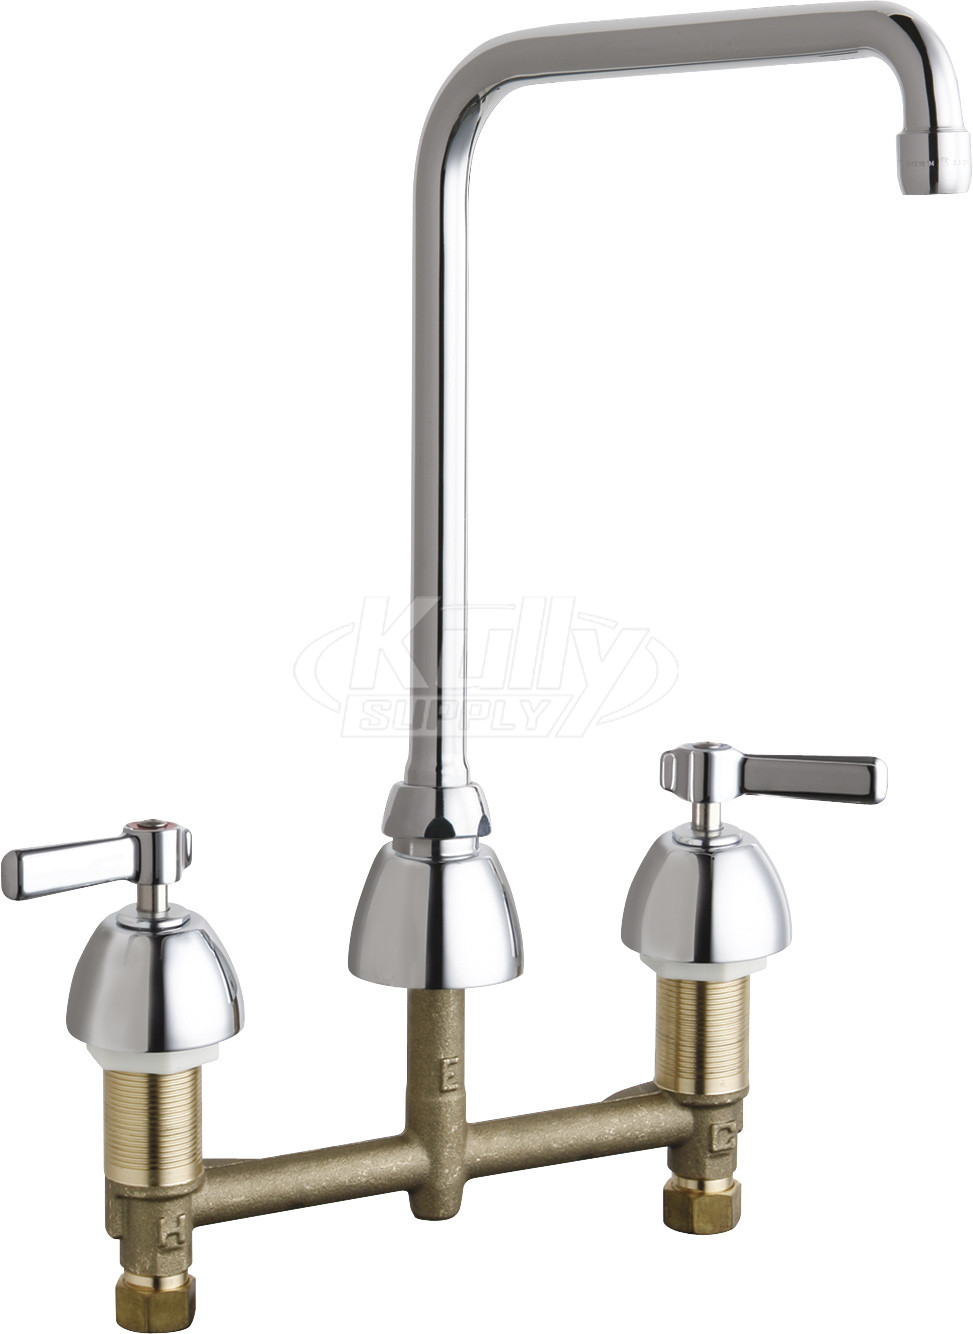 Chicago 201-AHA8ABCP Concealed Hot and Cold Water Sink Faucet